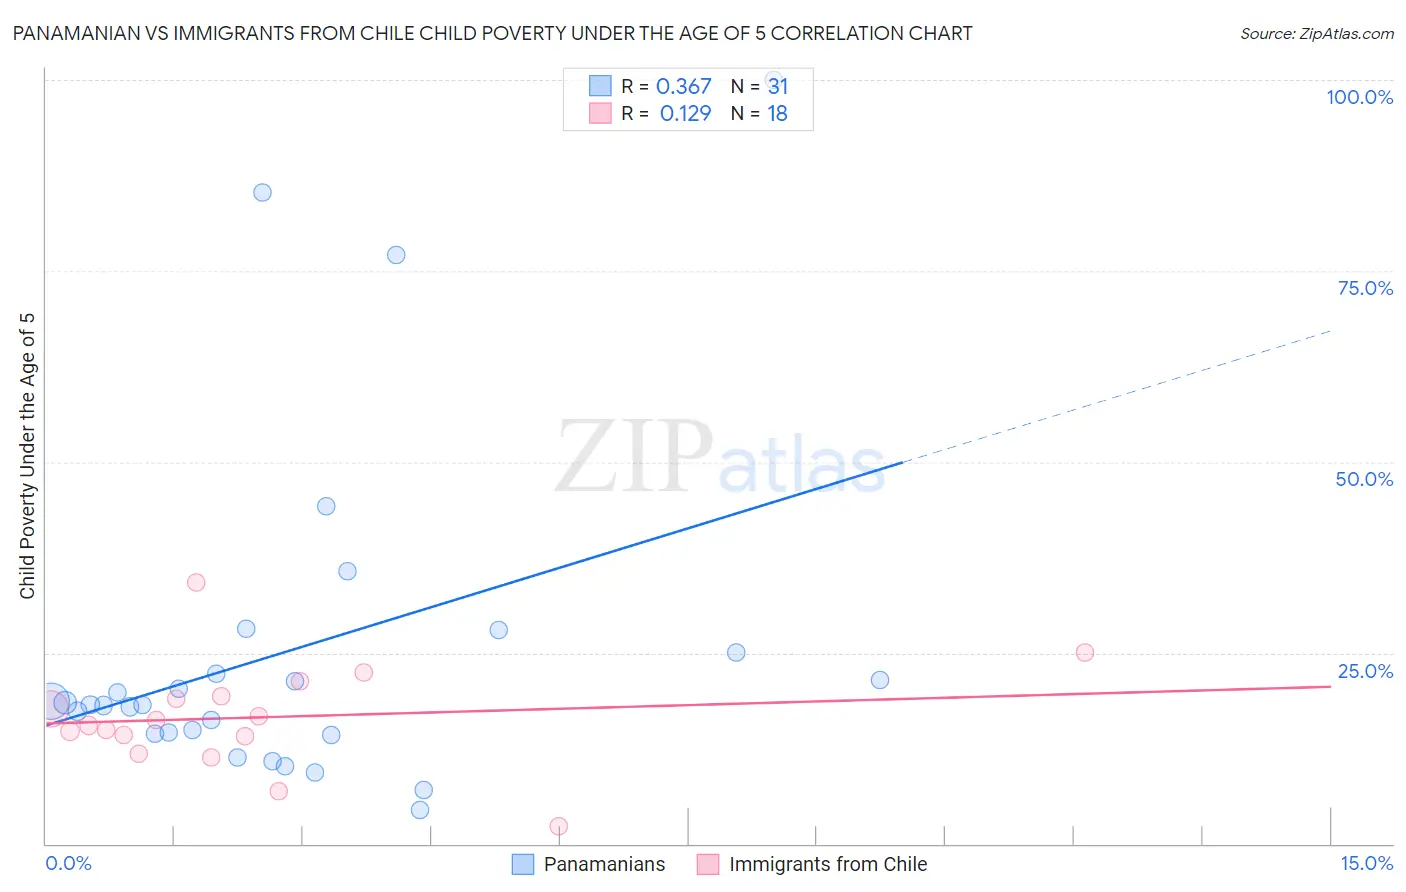 Panamanian vs Immigrants from Chile Child Poverty Under the Age of 5